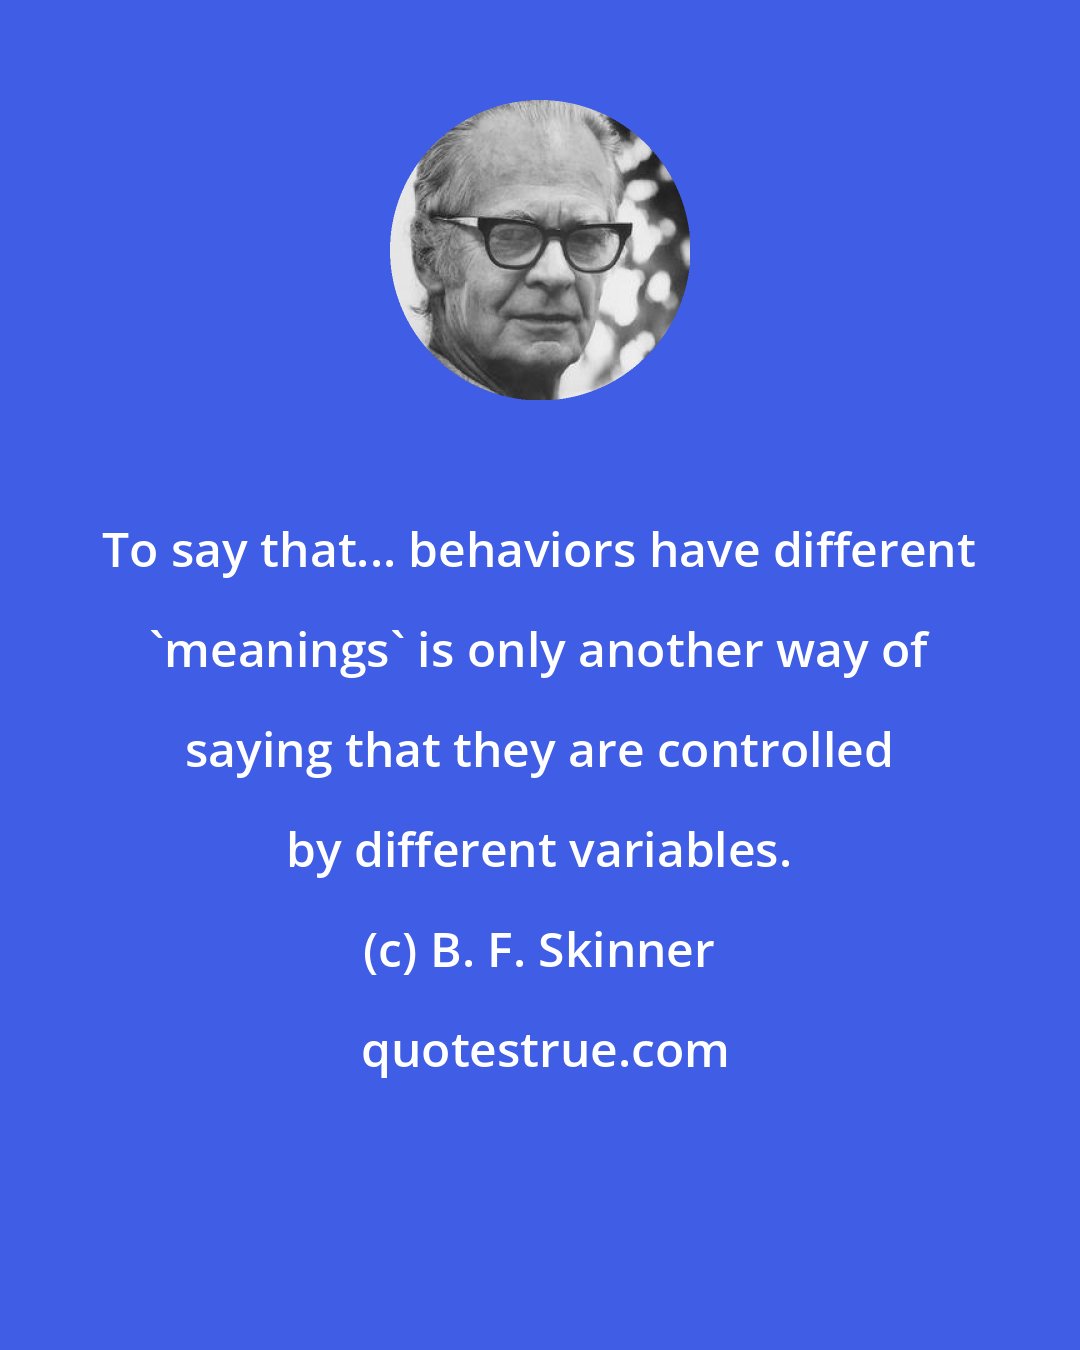 B. F. Skinner: To say that... behaviors have different 'meanings' is only another way of saying that they are controlled by different variables.